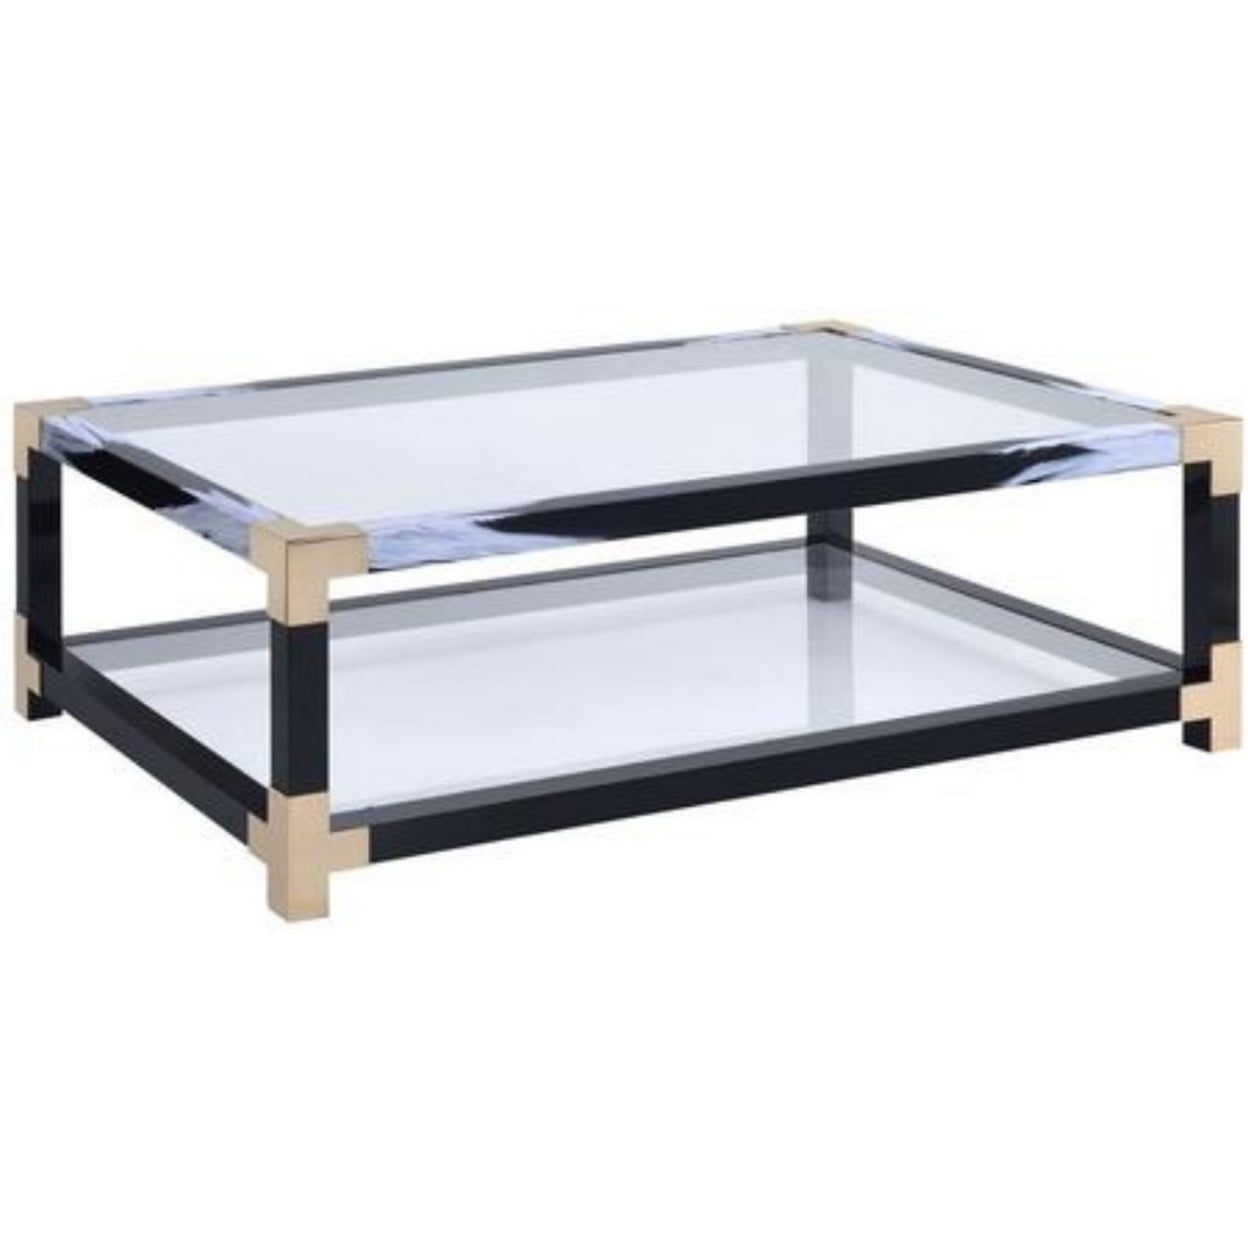 Picture of ACME 81000 Lafty Coffee Table - White Brushed & Clear Glass - 18 x 54 x 34 in.